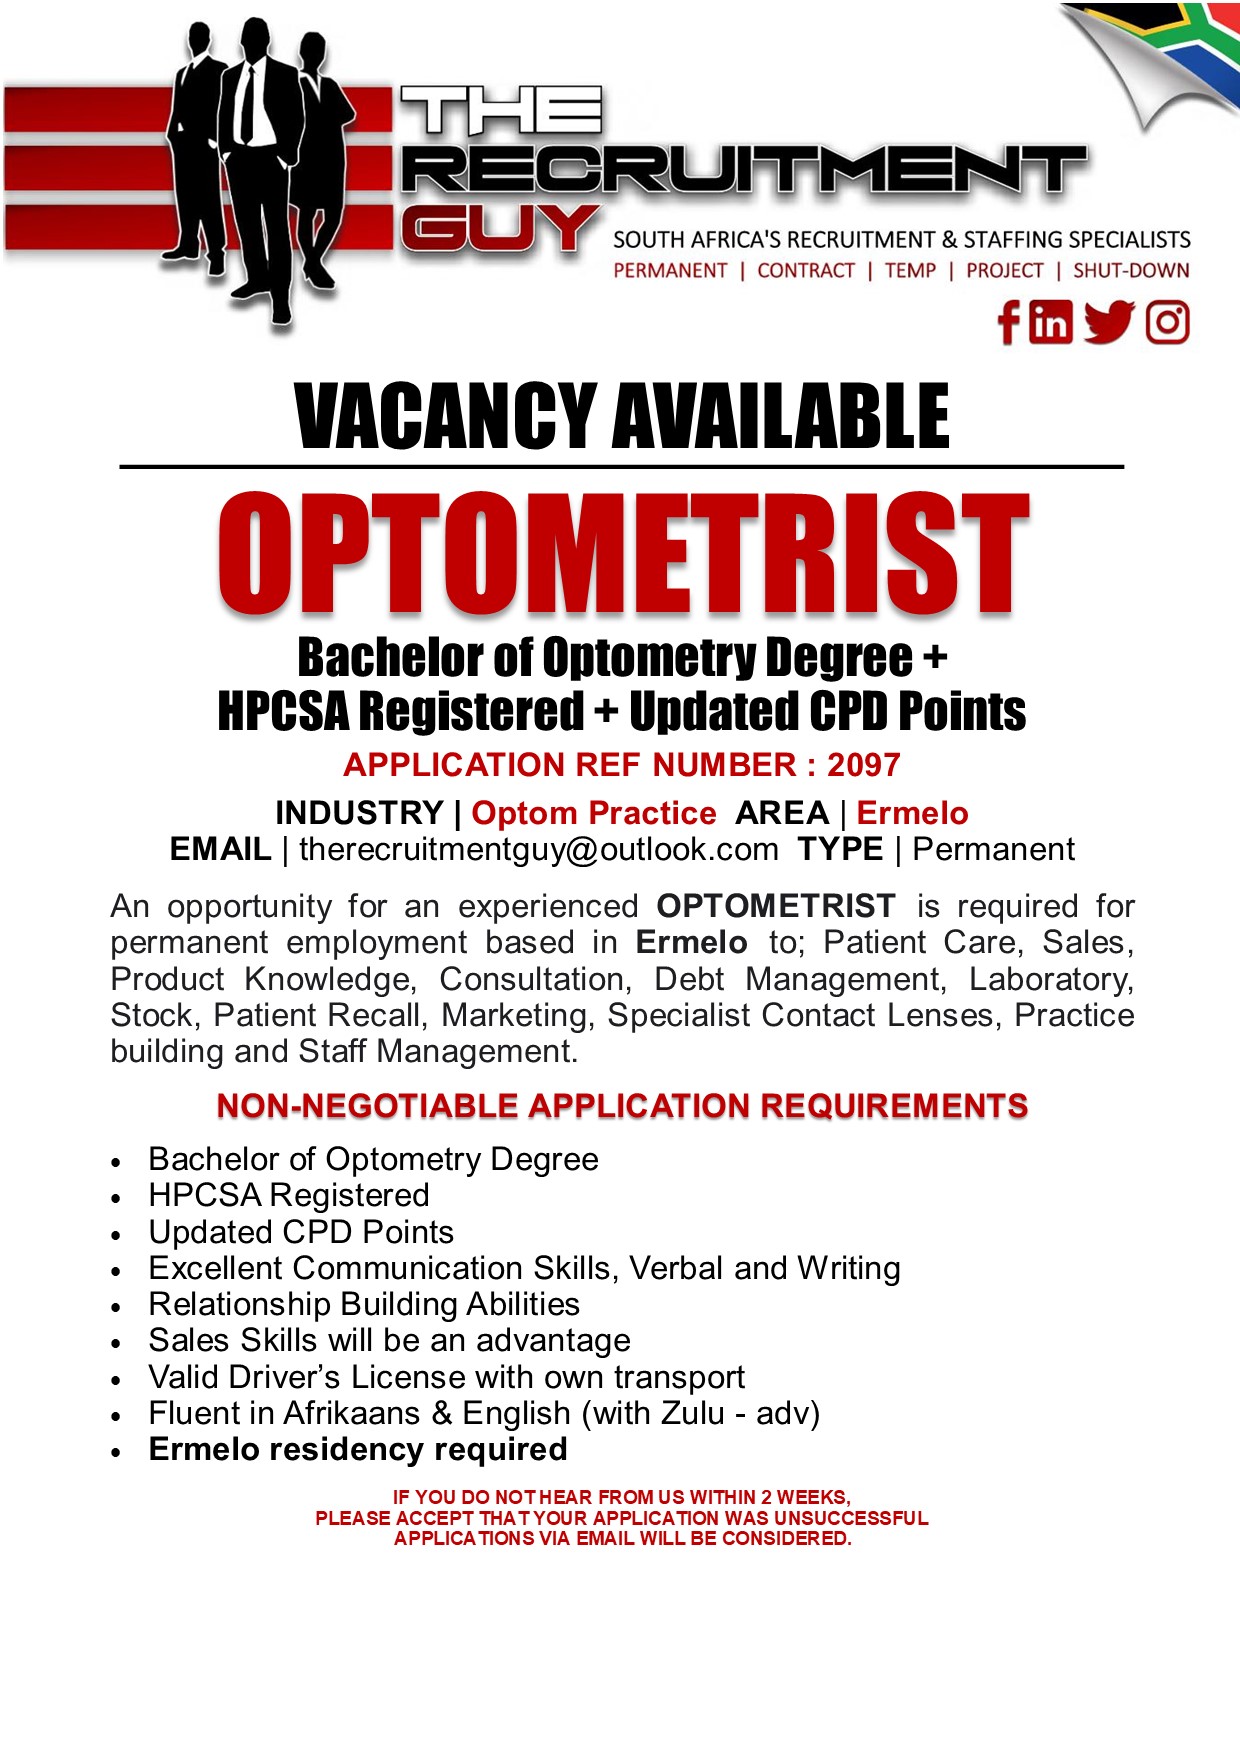 GUY SOUTH AFRICA'S RECRUITMENT &amp; STAFFING SPECIALISTS

PERMANENT | CONTRACT | TEMP | PROJECT | SHUT-DOWN

{ink JG]

 

VACANCY AVAILABLE

OPTOMETRIST

Bachelor of Optometry Degree =
HPCSA Registered + Updated CPD Points

APPLICATION REF NUMBER : 2097

INDUSTRY | Optom Practice AREA | Ermelo
EMAIL | therecruitmentguy@outlook.com TYPE | Permanent

An opportunity for an experienced OPTOMETRIST is required for
permanent employment based in Ermelo to; Patient Care, Sales,
Product Knowledge, Consultation, Debt Management, Laboratory,
Stock, Patient Recall, Marketing, Specialist Contact Lenses, Practice
building and Staff Management.

NON-NEGOTIABLE APPLICATION REQUIREMENTS

Bachelor of Optometry Degree

HPCSA Registered

Updated CPD Points

Excellent Communication Skills, Verbal and Writing
Relationship Building Abilities

Sales Skills will be an advantage

Valid Driver's License with own transport

Fluent in Afrikaans &amp; English (with Zulu - adv)
Ermelo residency required

IF YOU DO NOTHEAR FROM US WITHIN 2 WEEKS,
PLEASE ACCEPT THAT YOUR APPLICATION WAS UNSUCCESSFUL
APPLICATIONS VIA EMAIL WILL BE CONSIDERED.